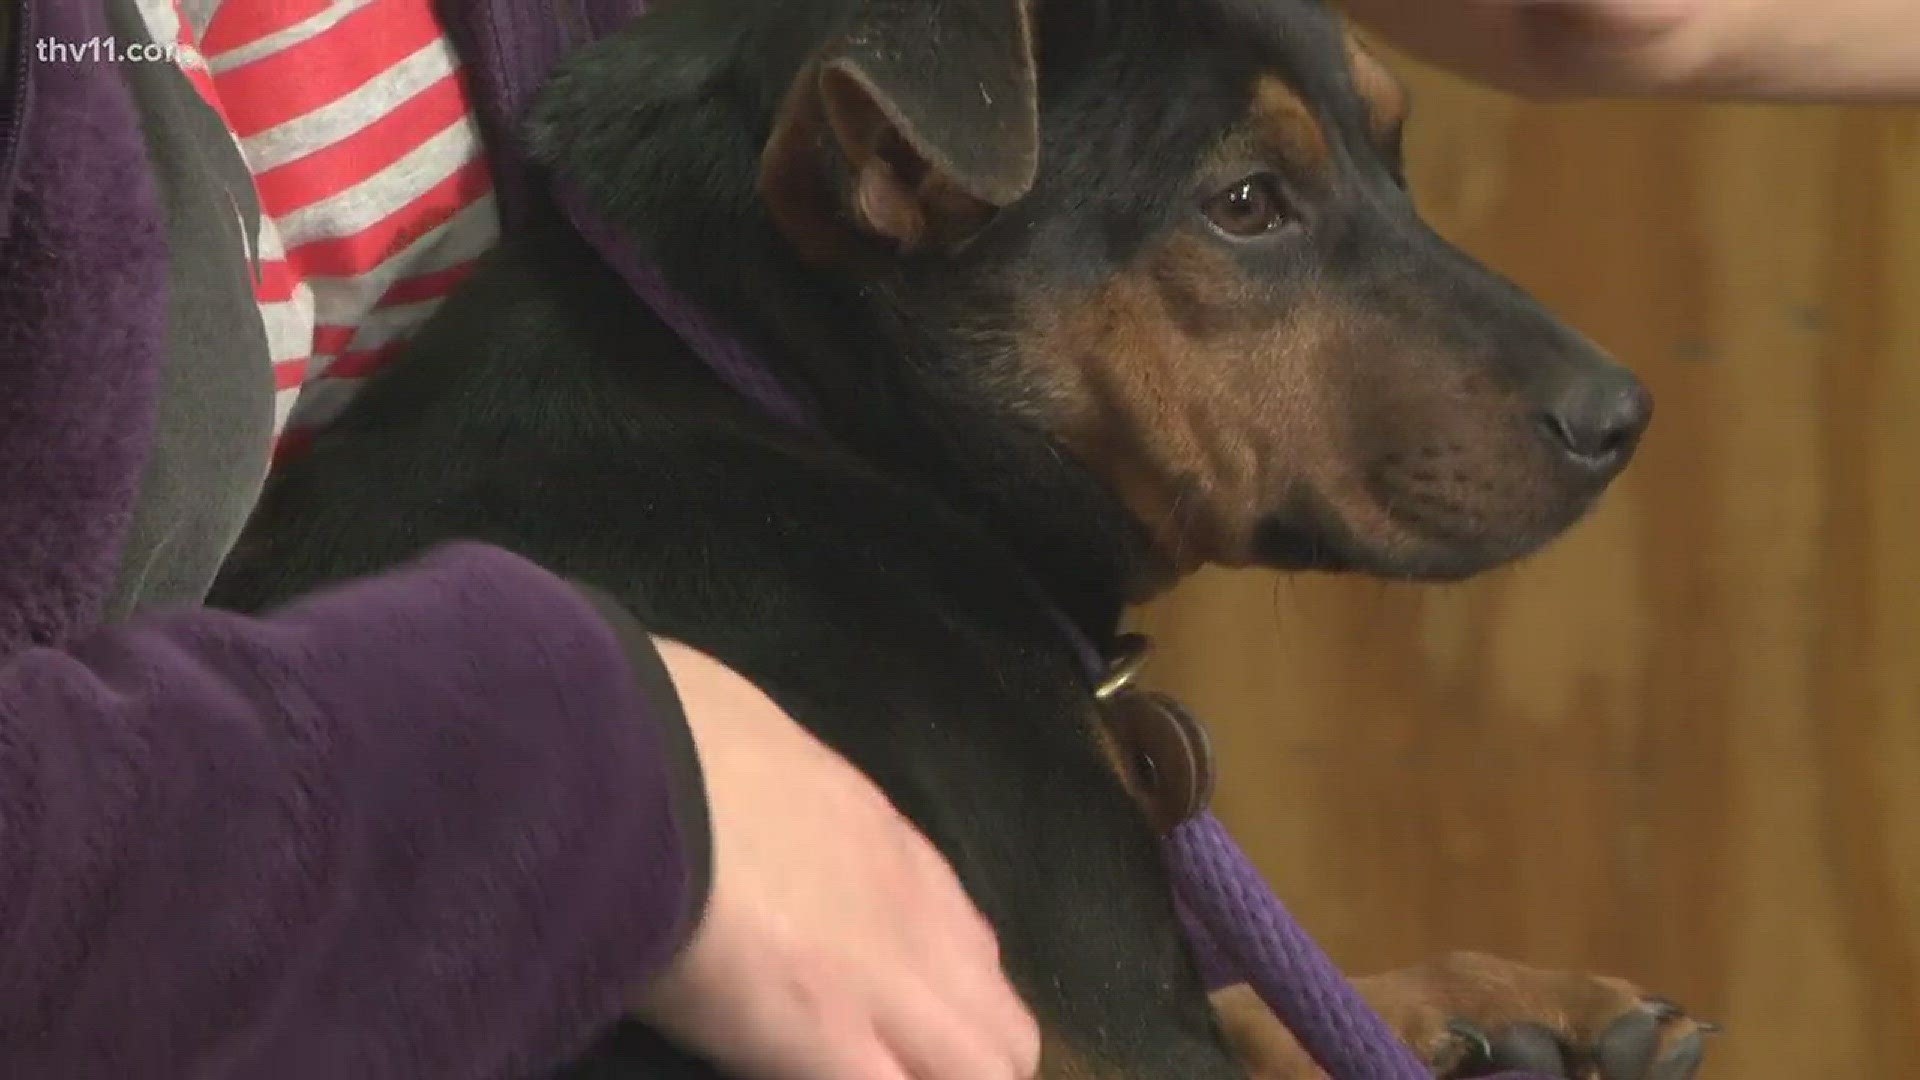 Betsy Robb from Friends of the Animal Village joined THV11 This Morning with Tucker